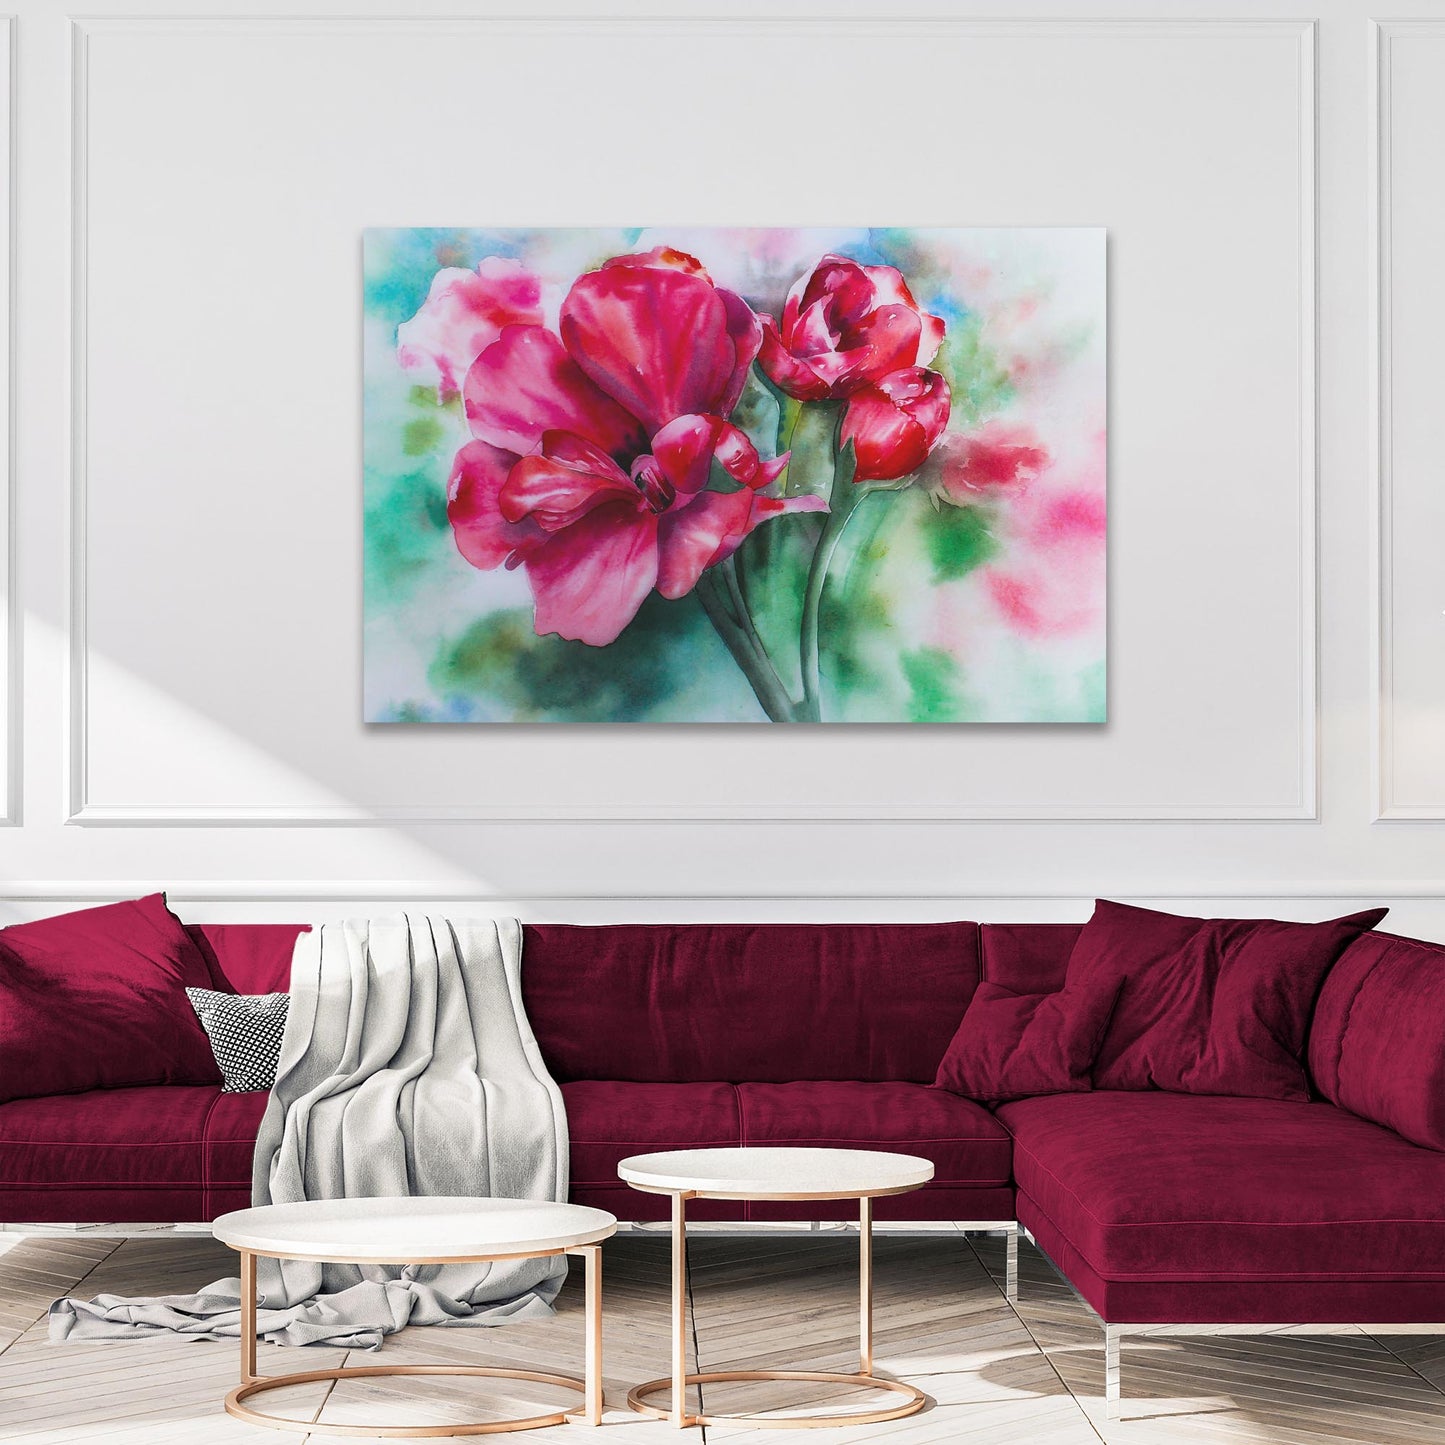 Flowers Geranium Pink Watercolor Canvas Wall Art - Image by Tailored Canvases